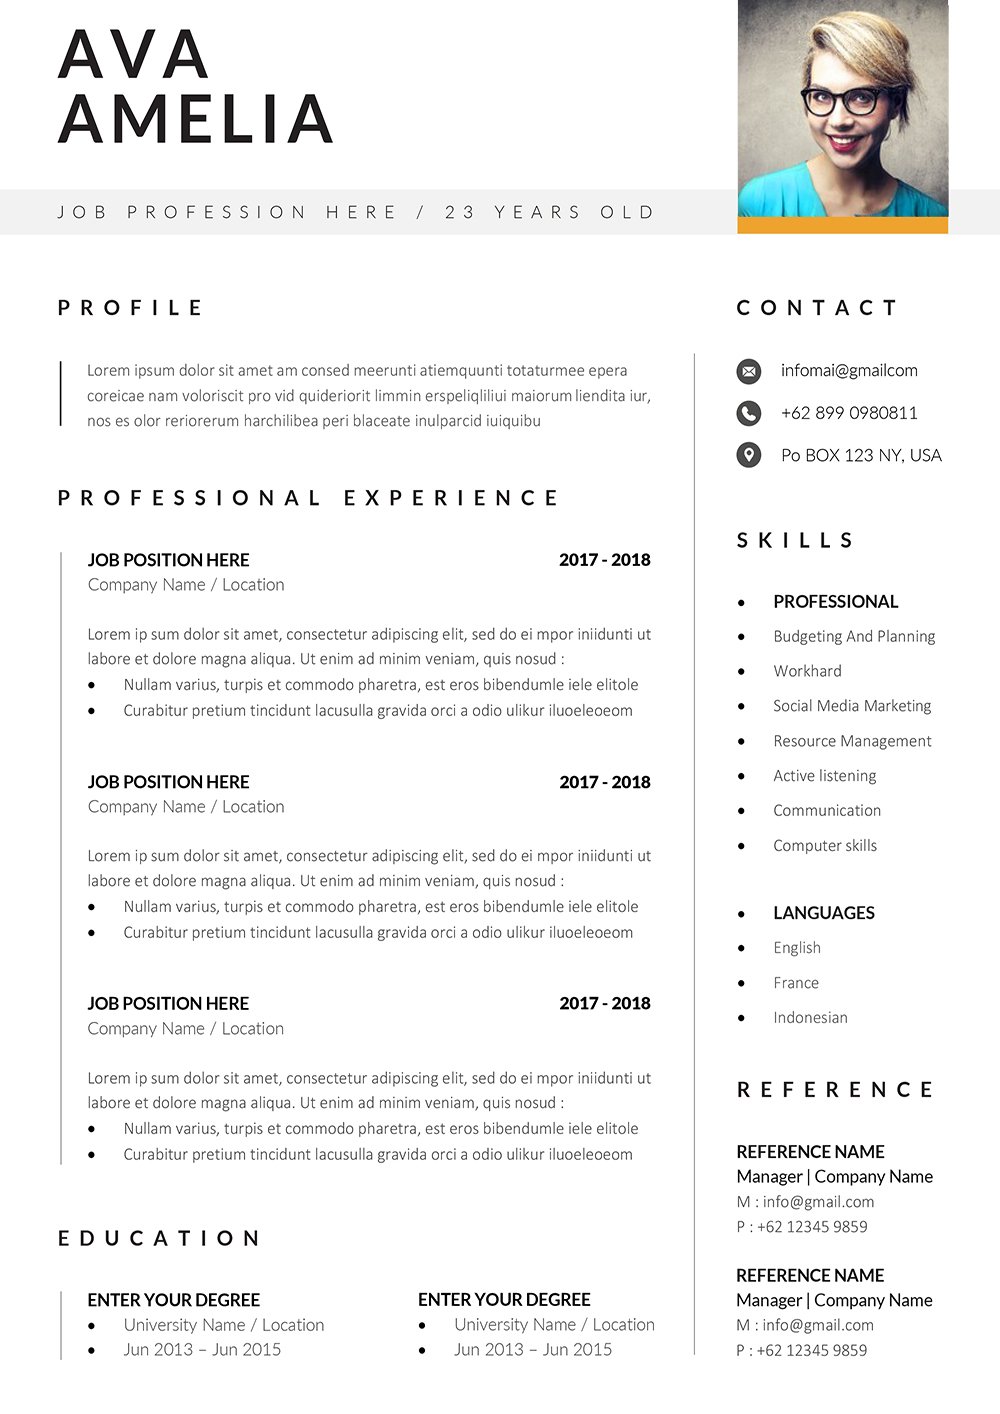 ATS Friendly Resume Template Word Format (DOC/DOCX)